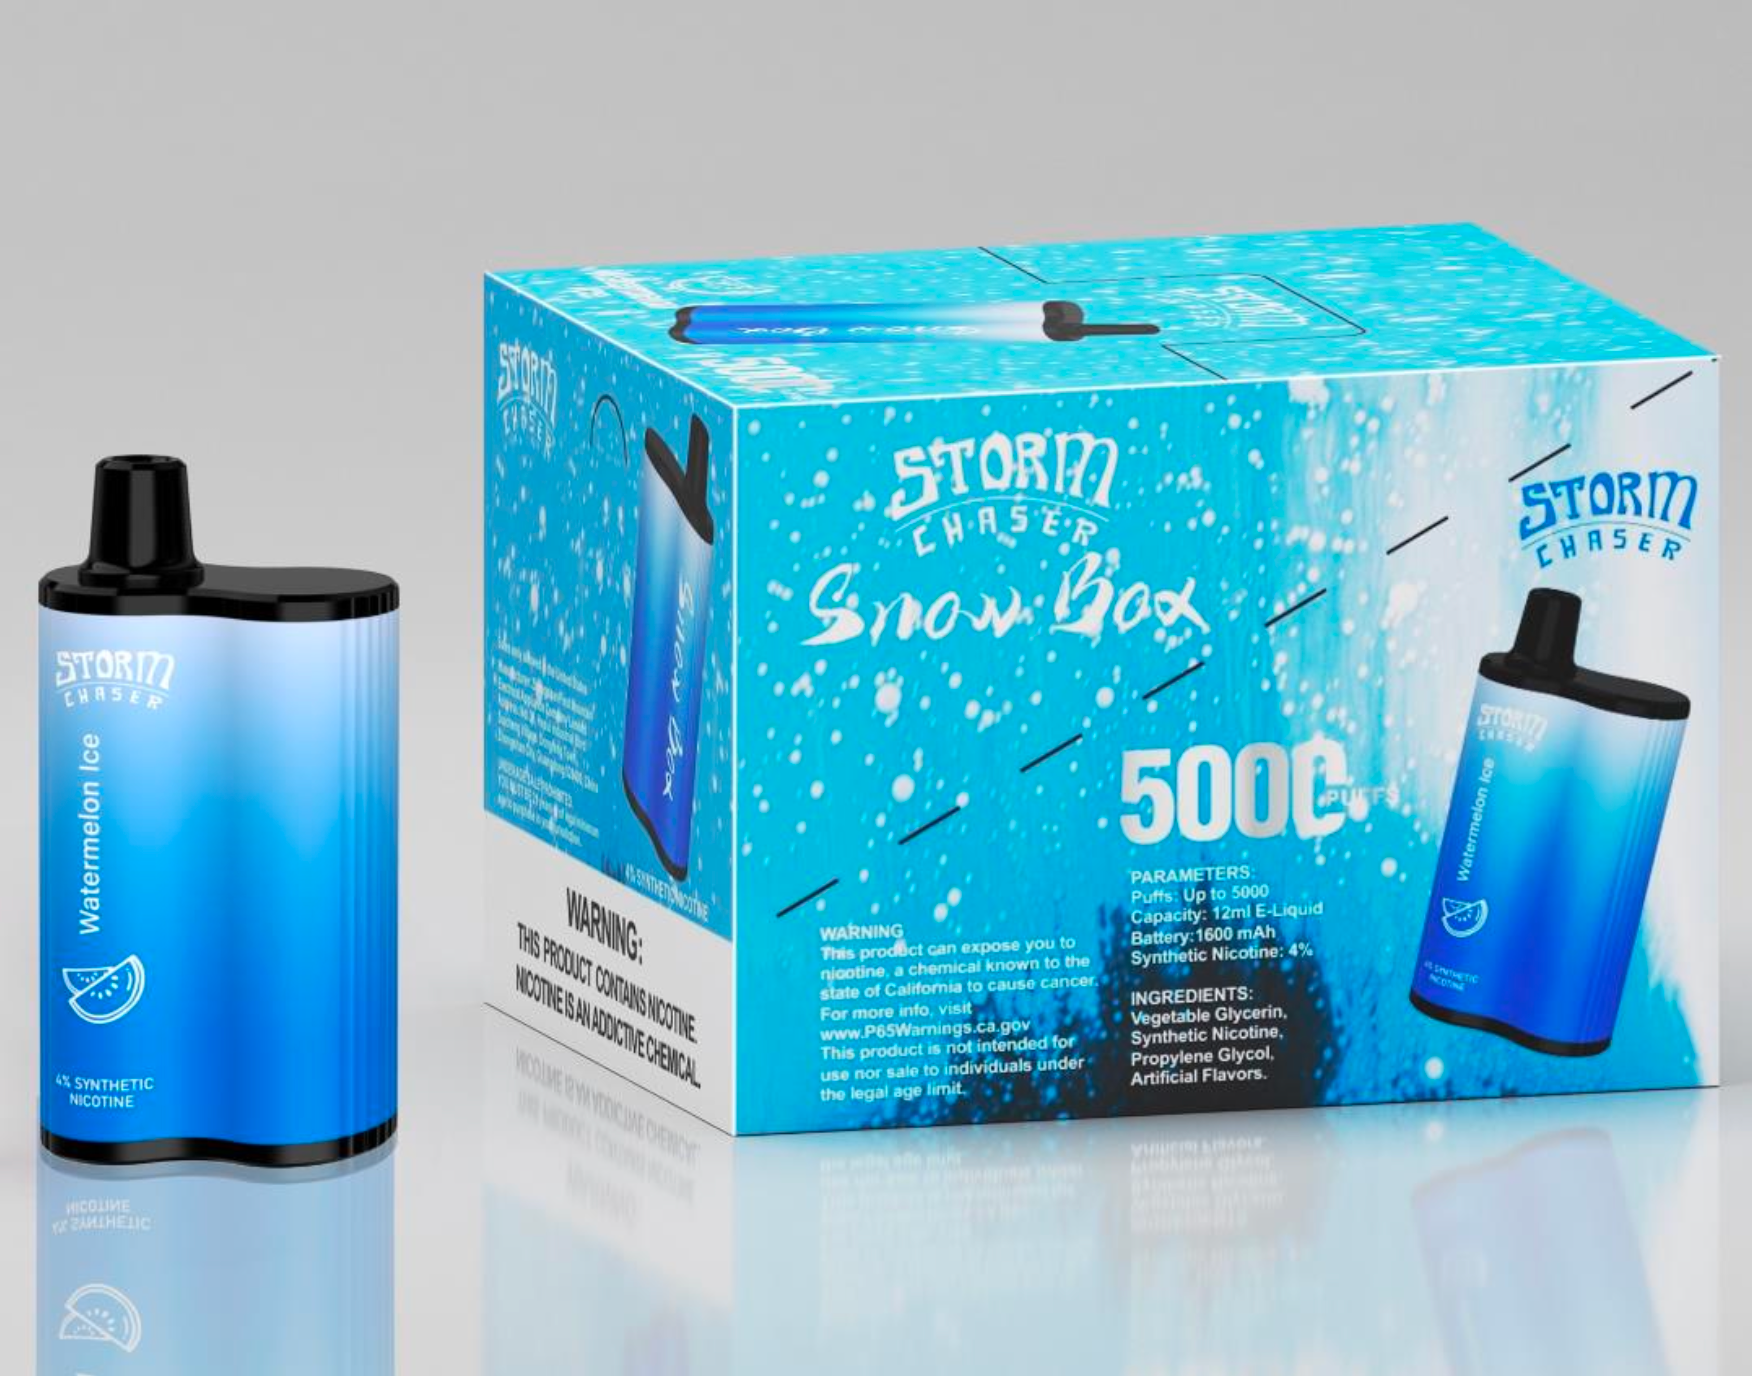 STORM CHASER  Snow Box  5000 puffs  Disposable Devices - Storm Chaser